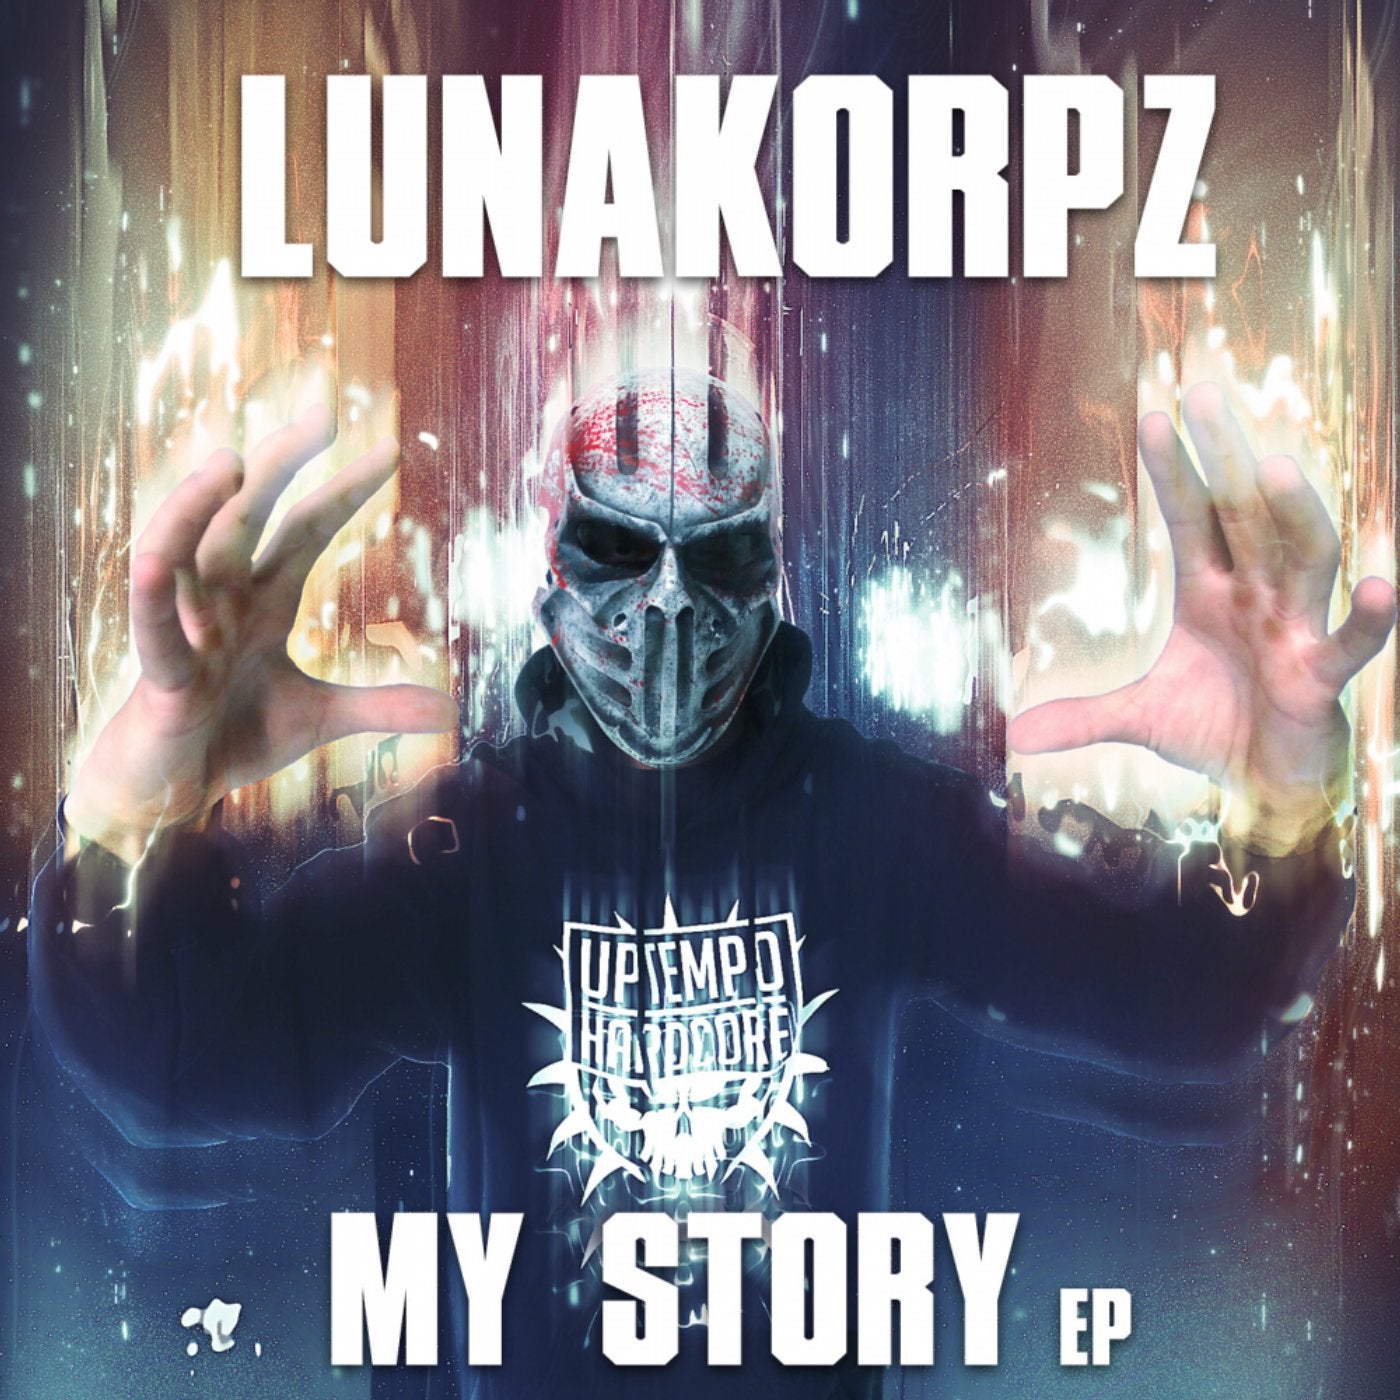 My Story EP